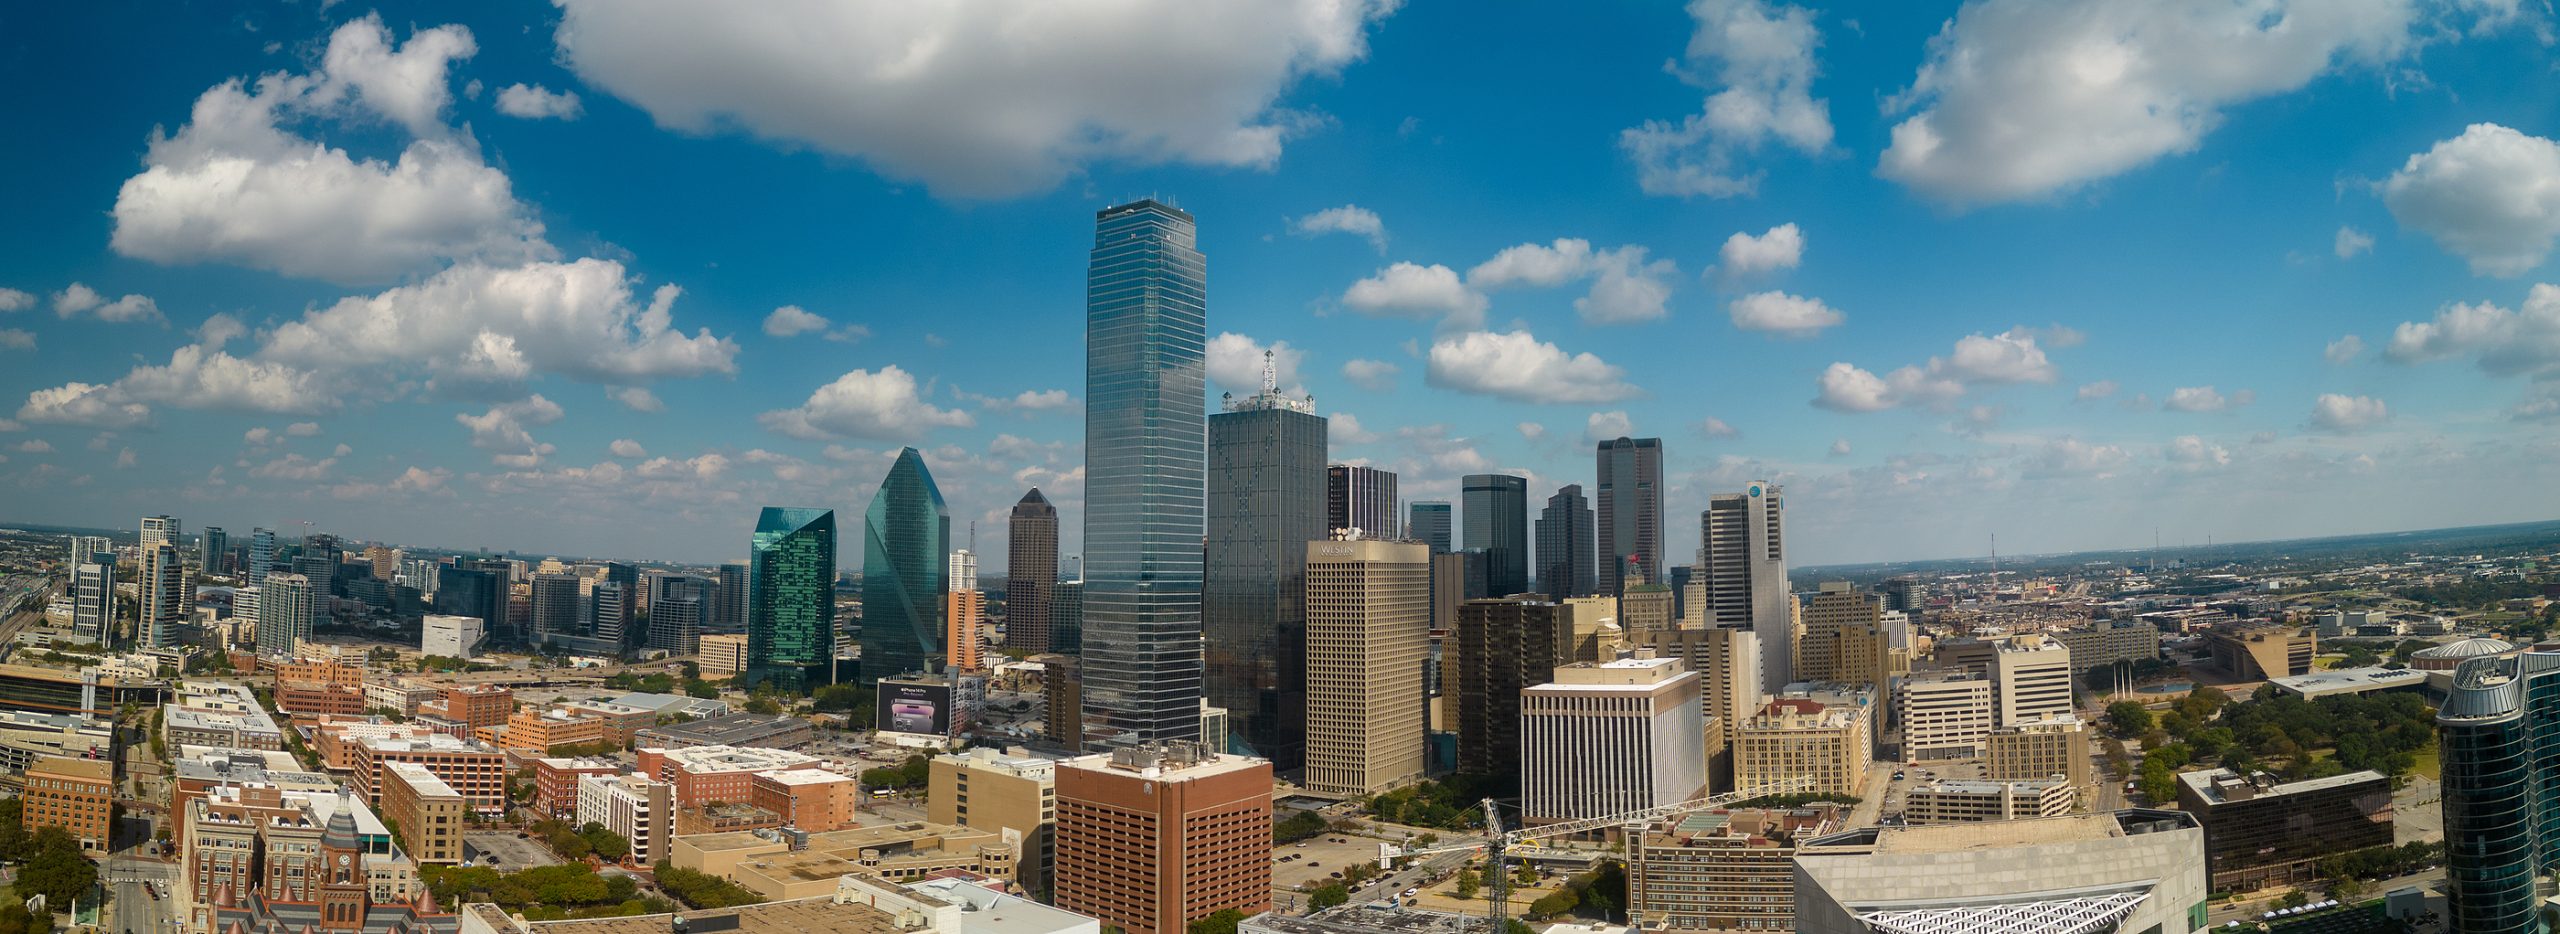 Panoramic view over the city of Dallas Texas - DALLAS, TEXAS - OCTOBER 30, 2022